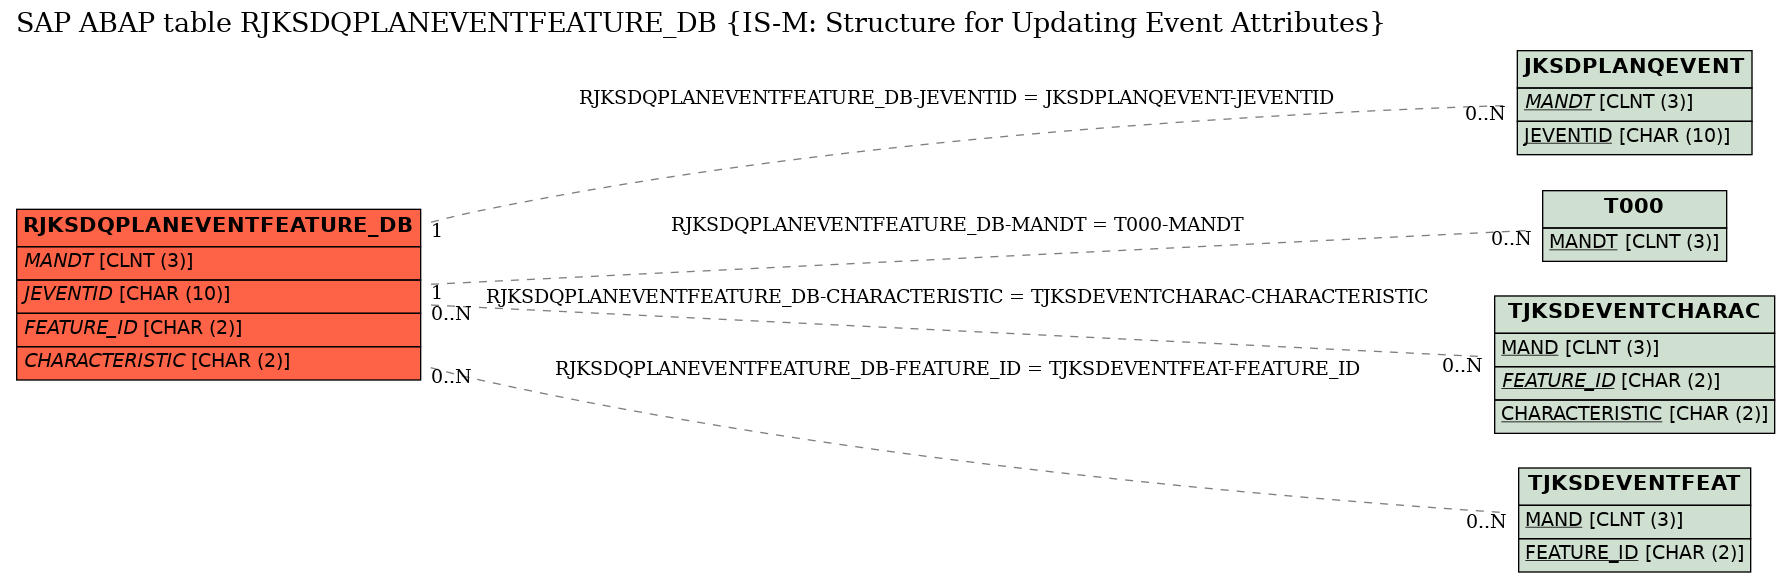 E-R Diagram for table RJKSDQPLANEVENTFEATURE_DB (IS-M: Structure for Updating Event Attributes)